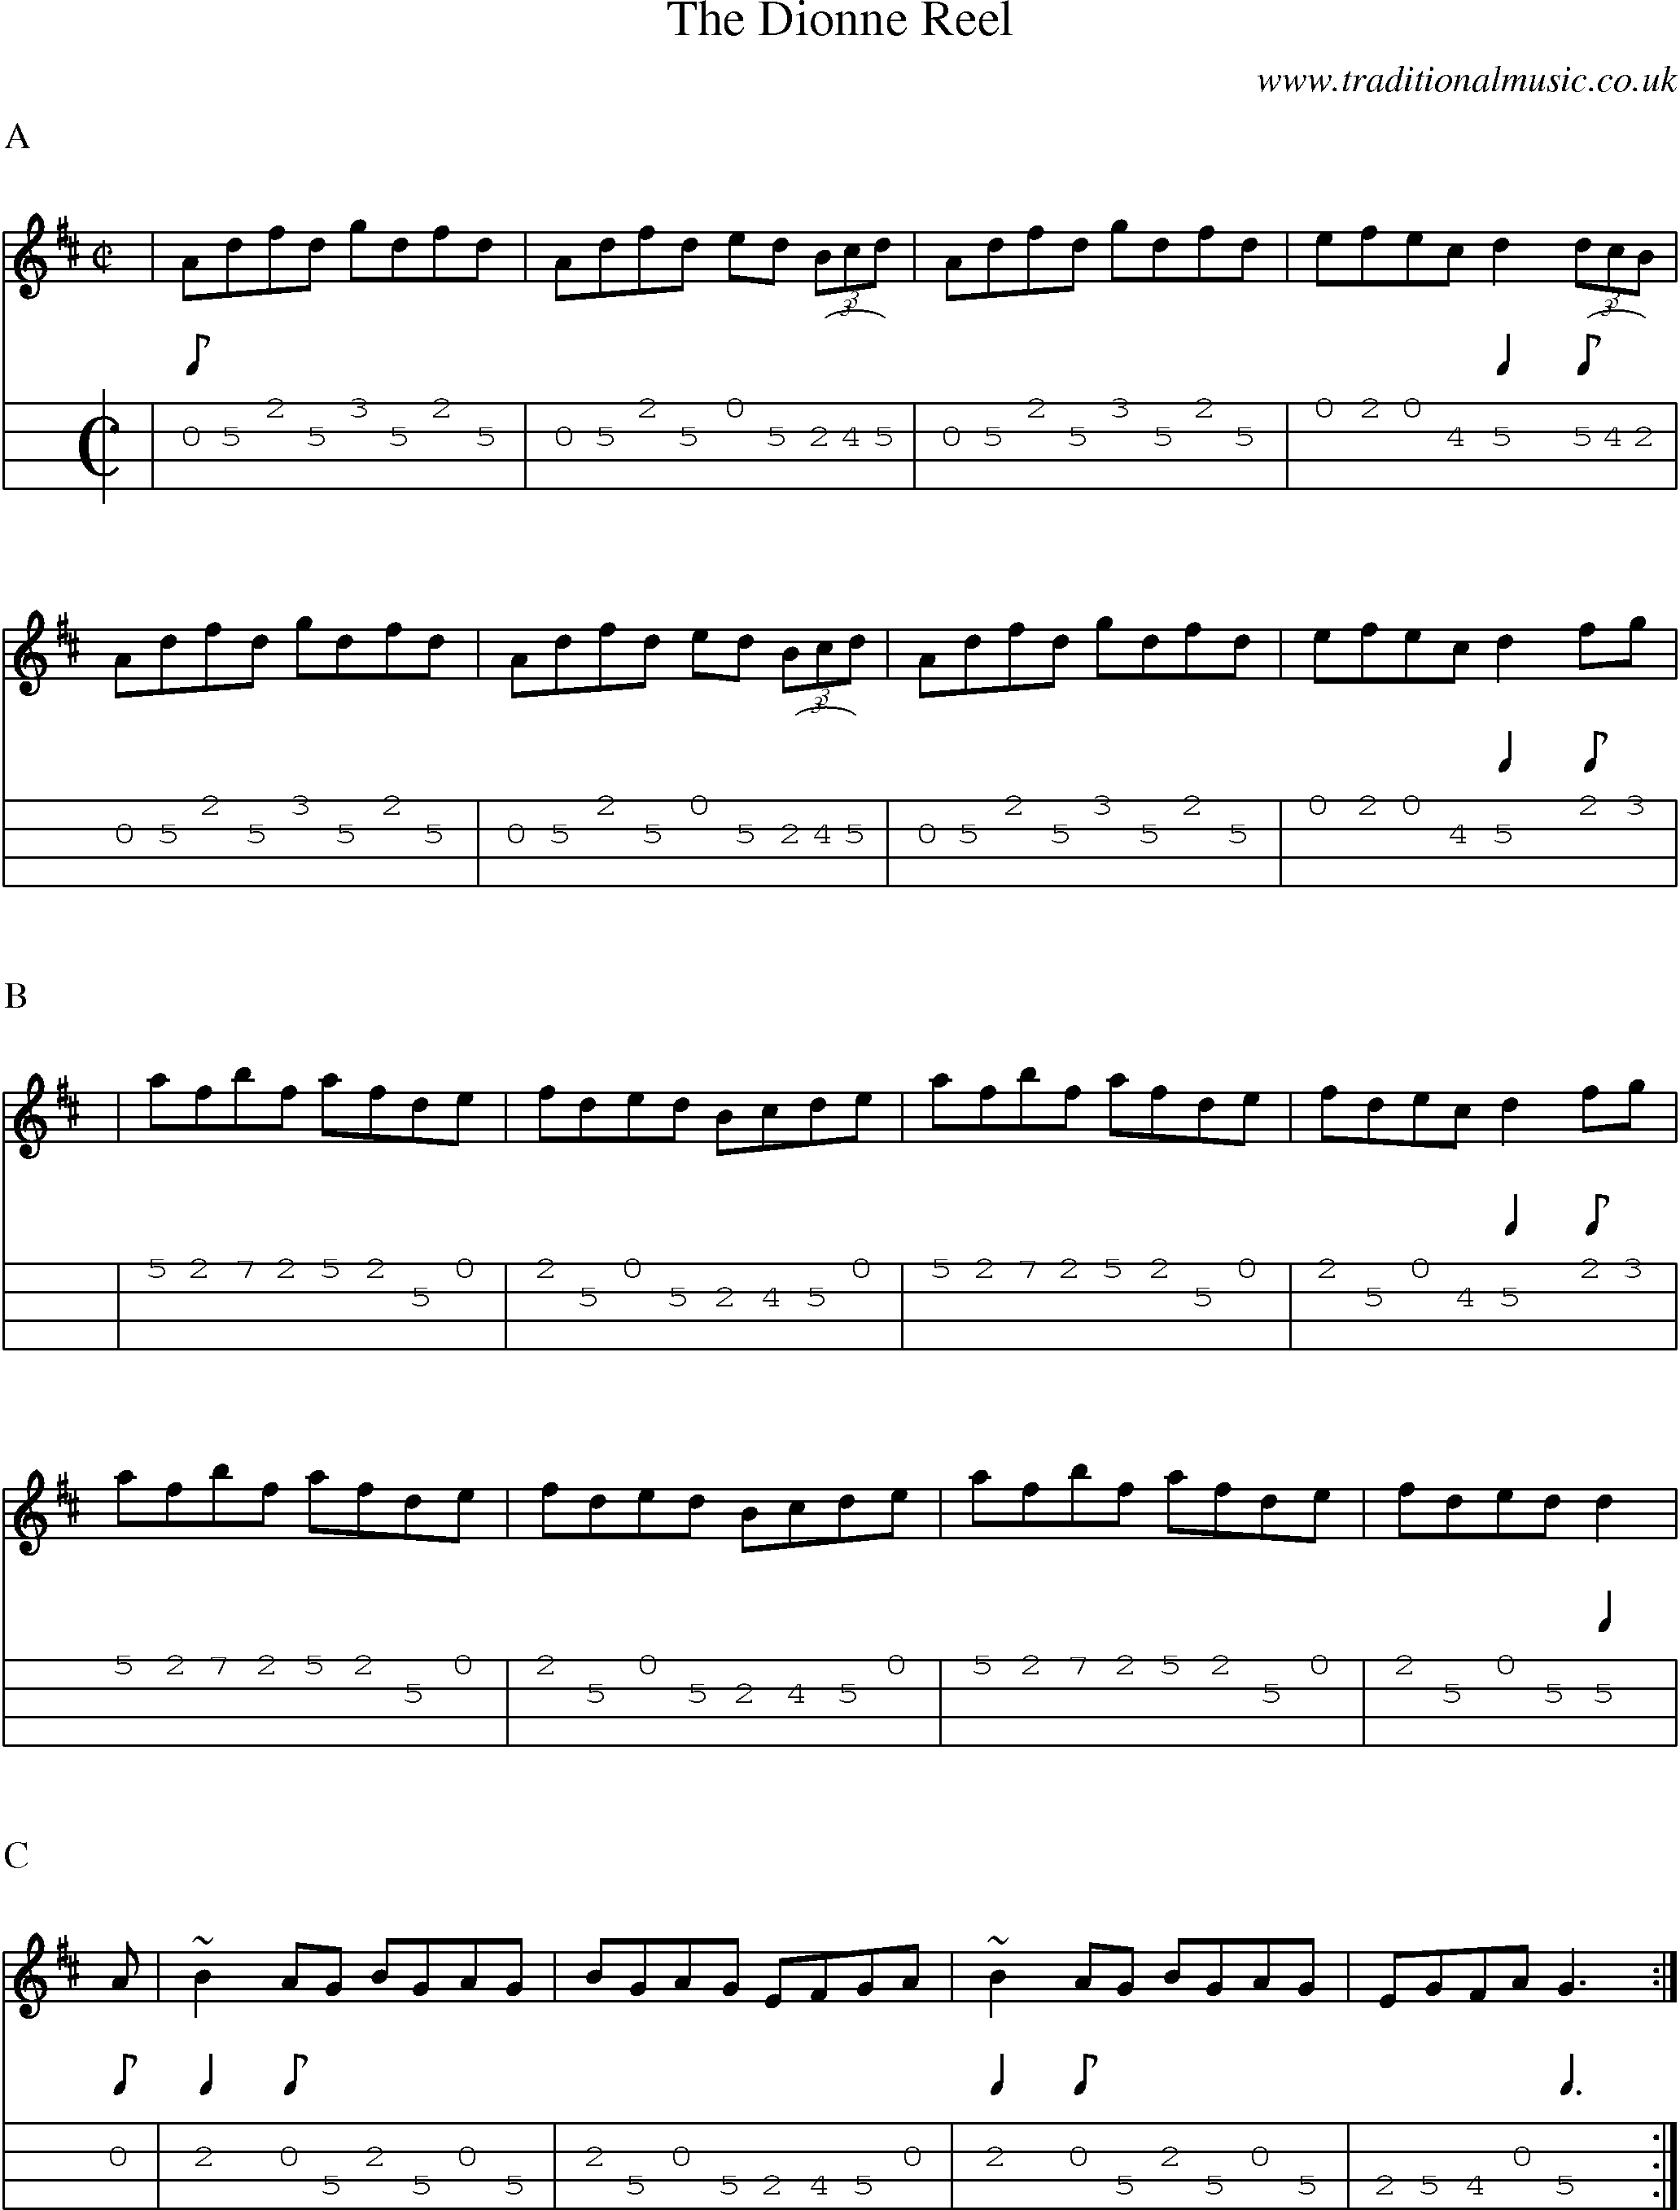 Music Score and Mandolin Tabs for The Dionne Reel